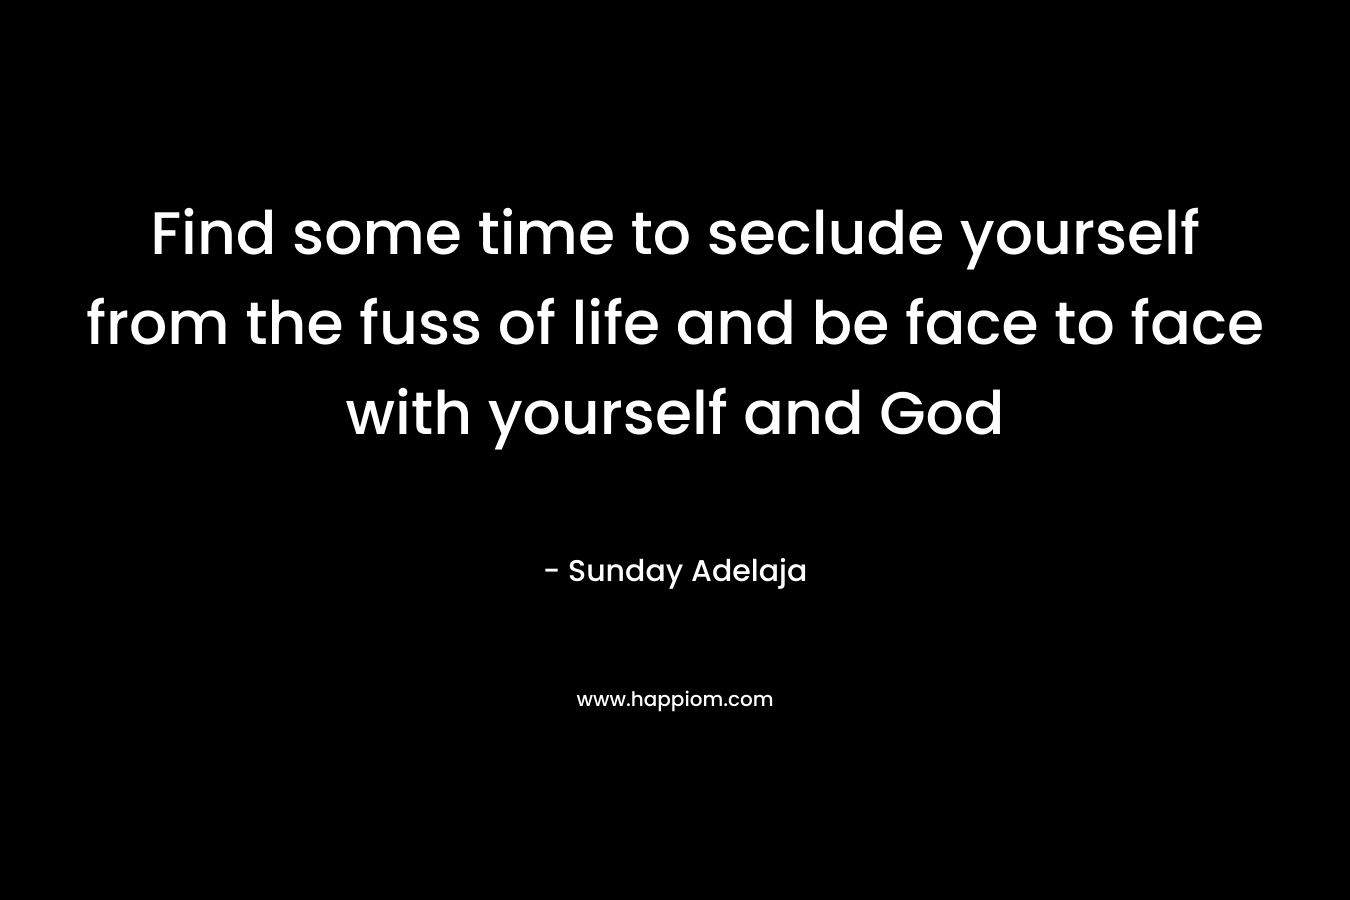 Find some time to seclude yourself from the fuss of life and be face to face with yourself and God